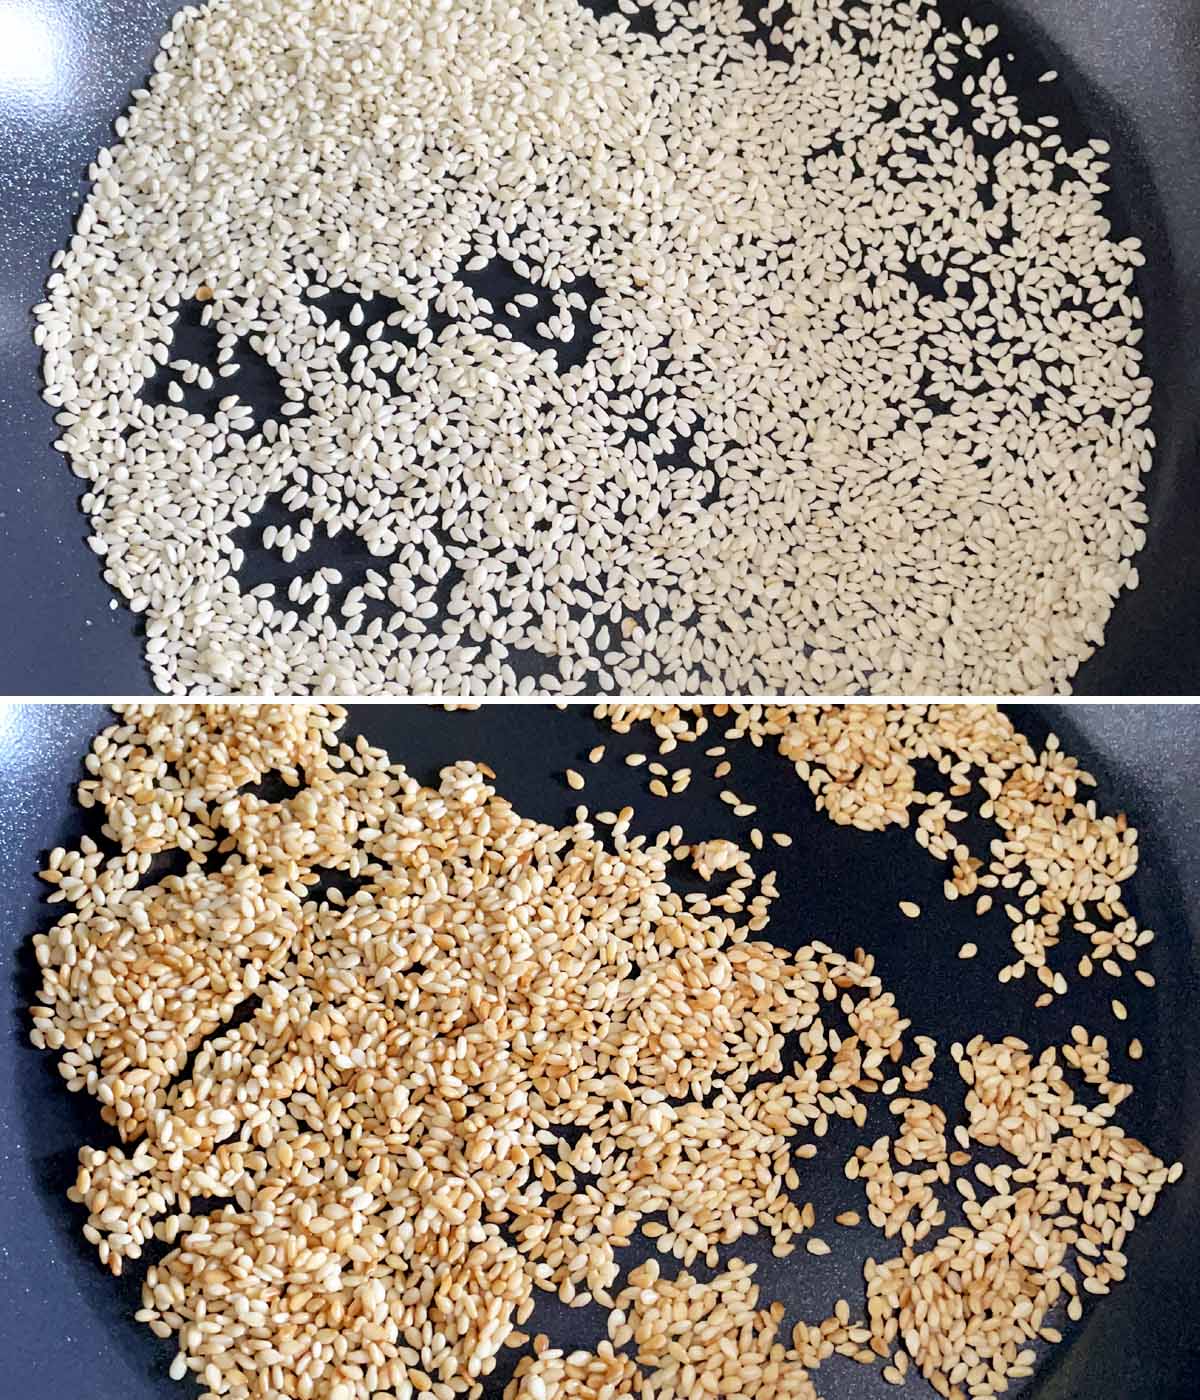 White sesame seeds in a dark round pan, golden brown toasted sesame seeds in a pan.